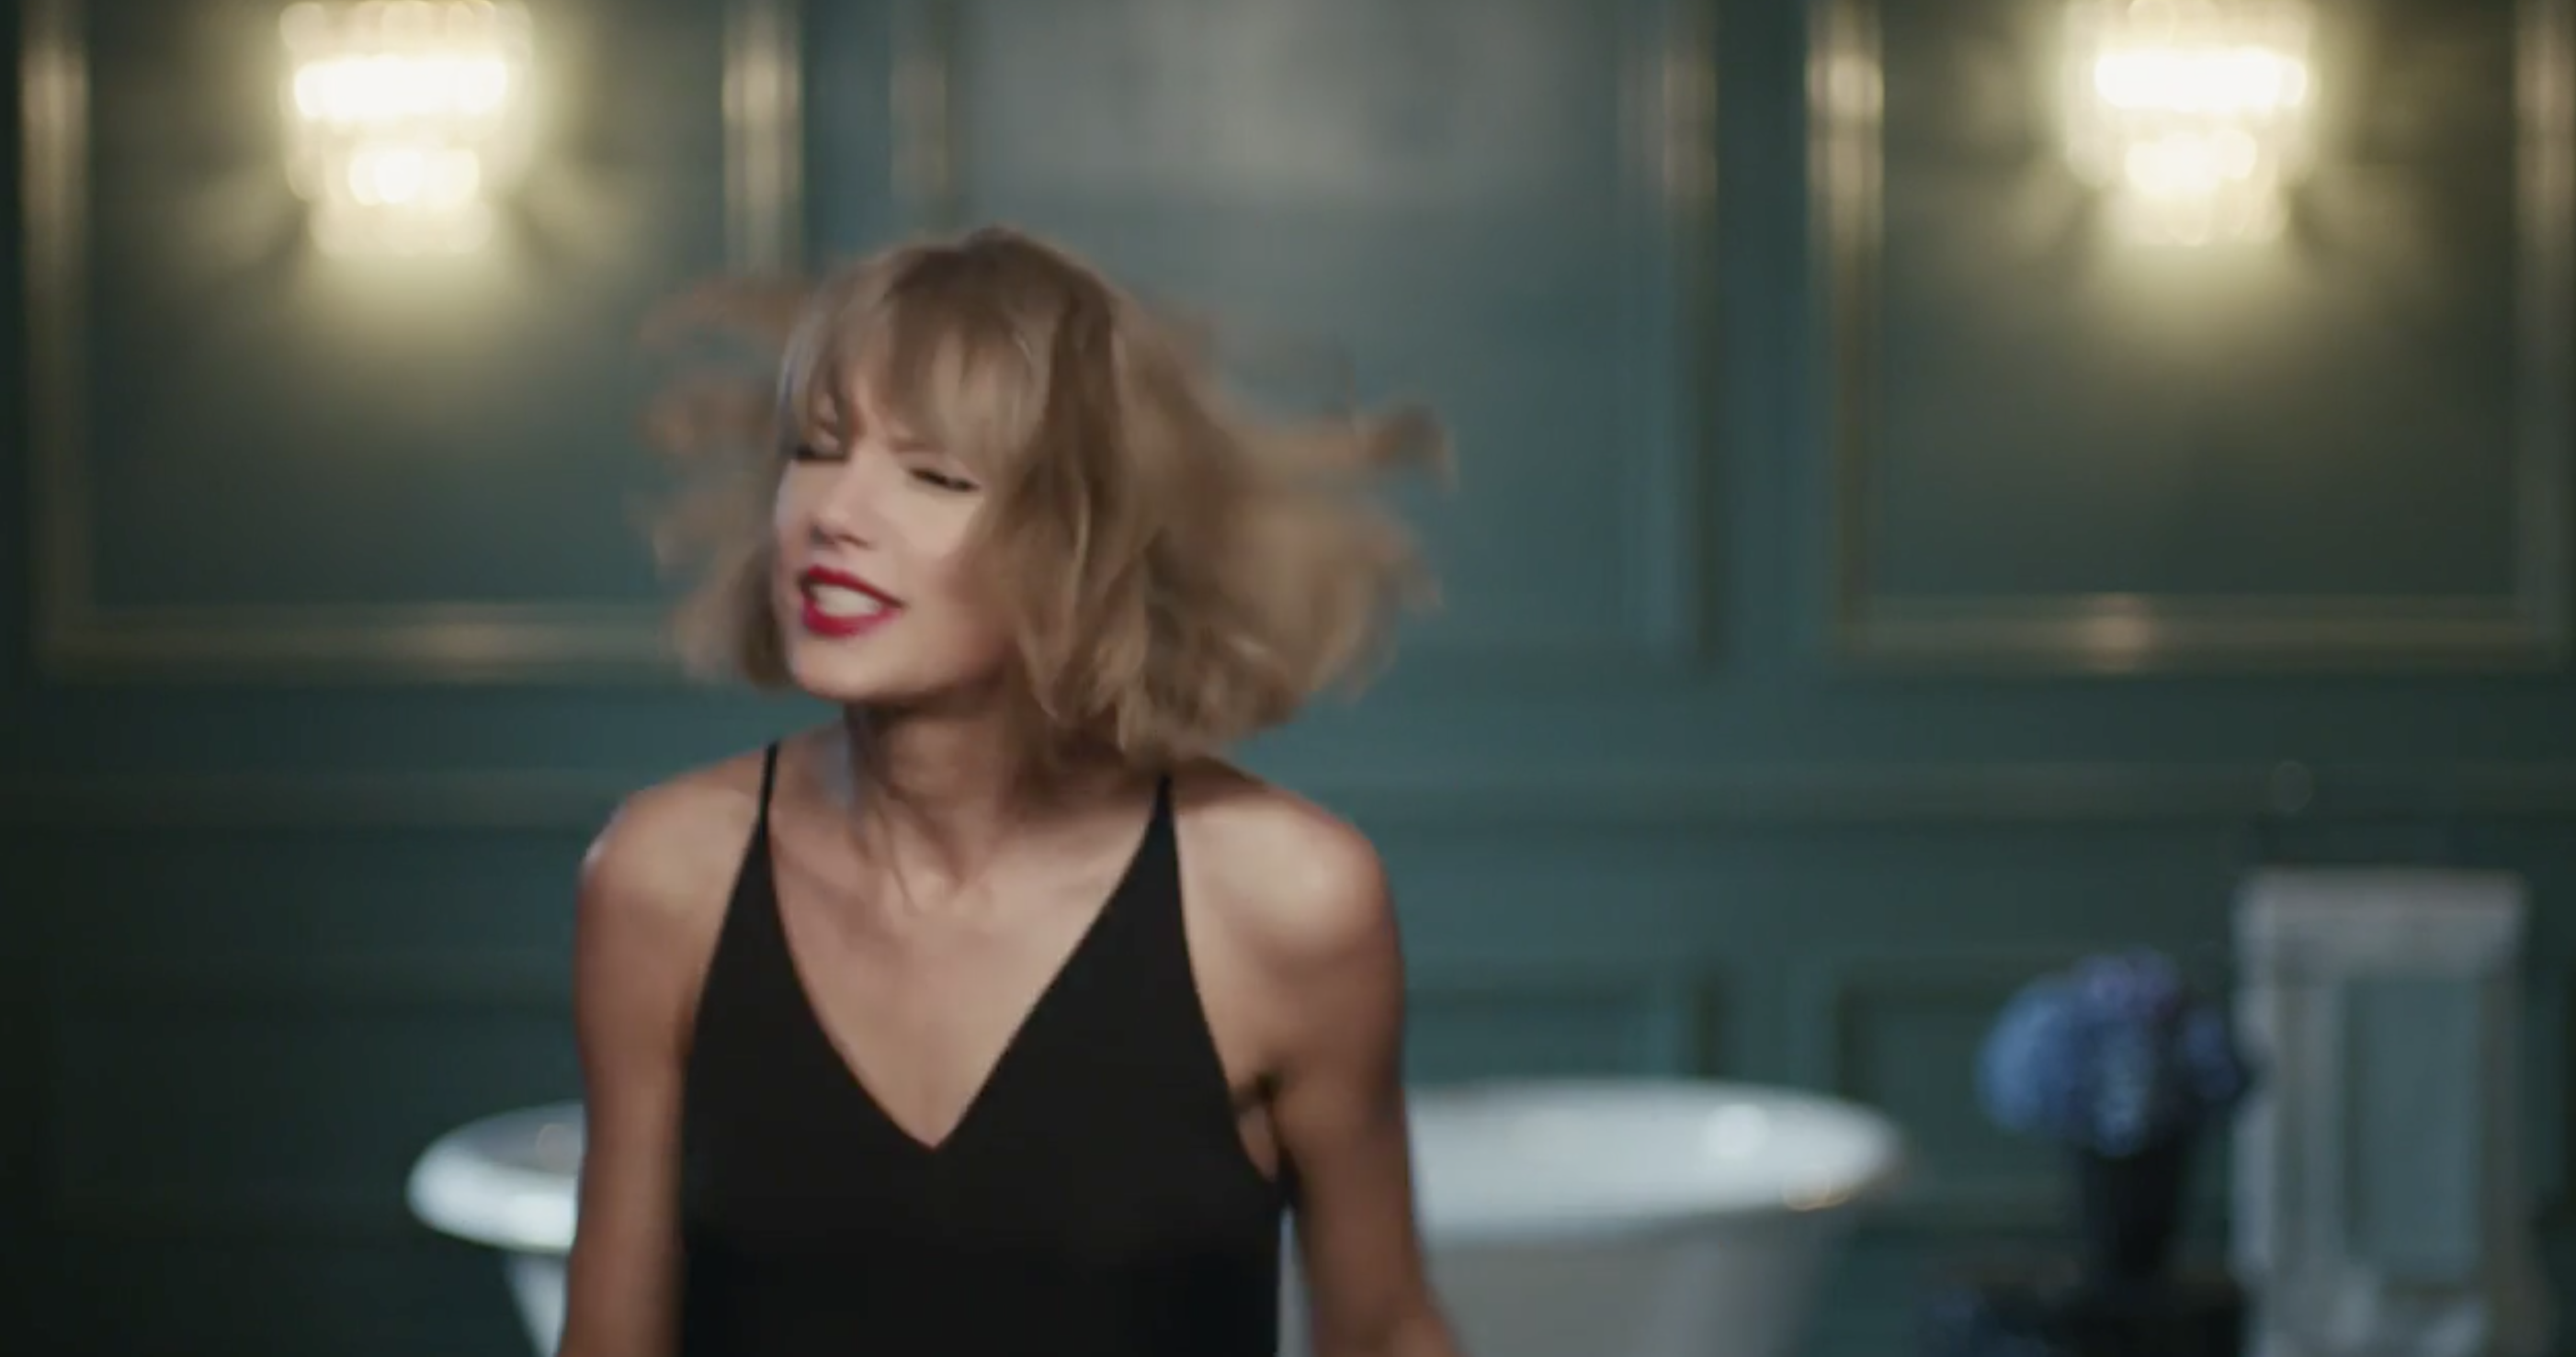 Taylor Swift features in another new Apple Music commercial, singing